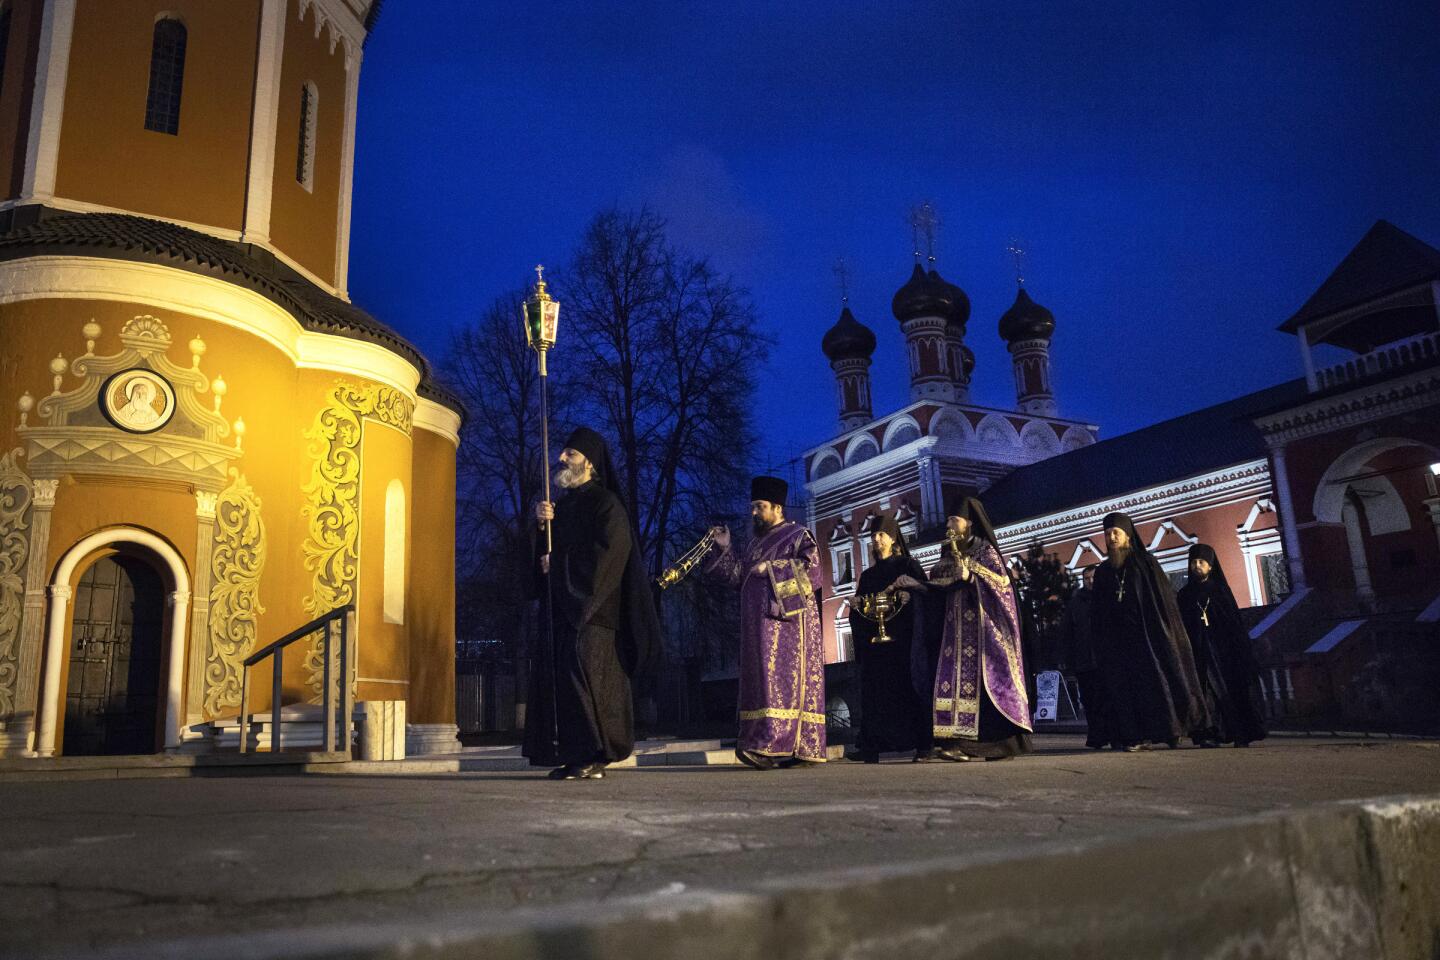 Russia: Russian Orthodox priests deliver a religious service for deliverance from the coronavirus at the St. Peter Monastery in the center of Moscow.